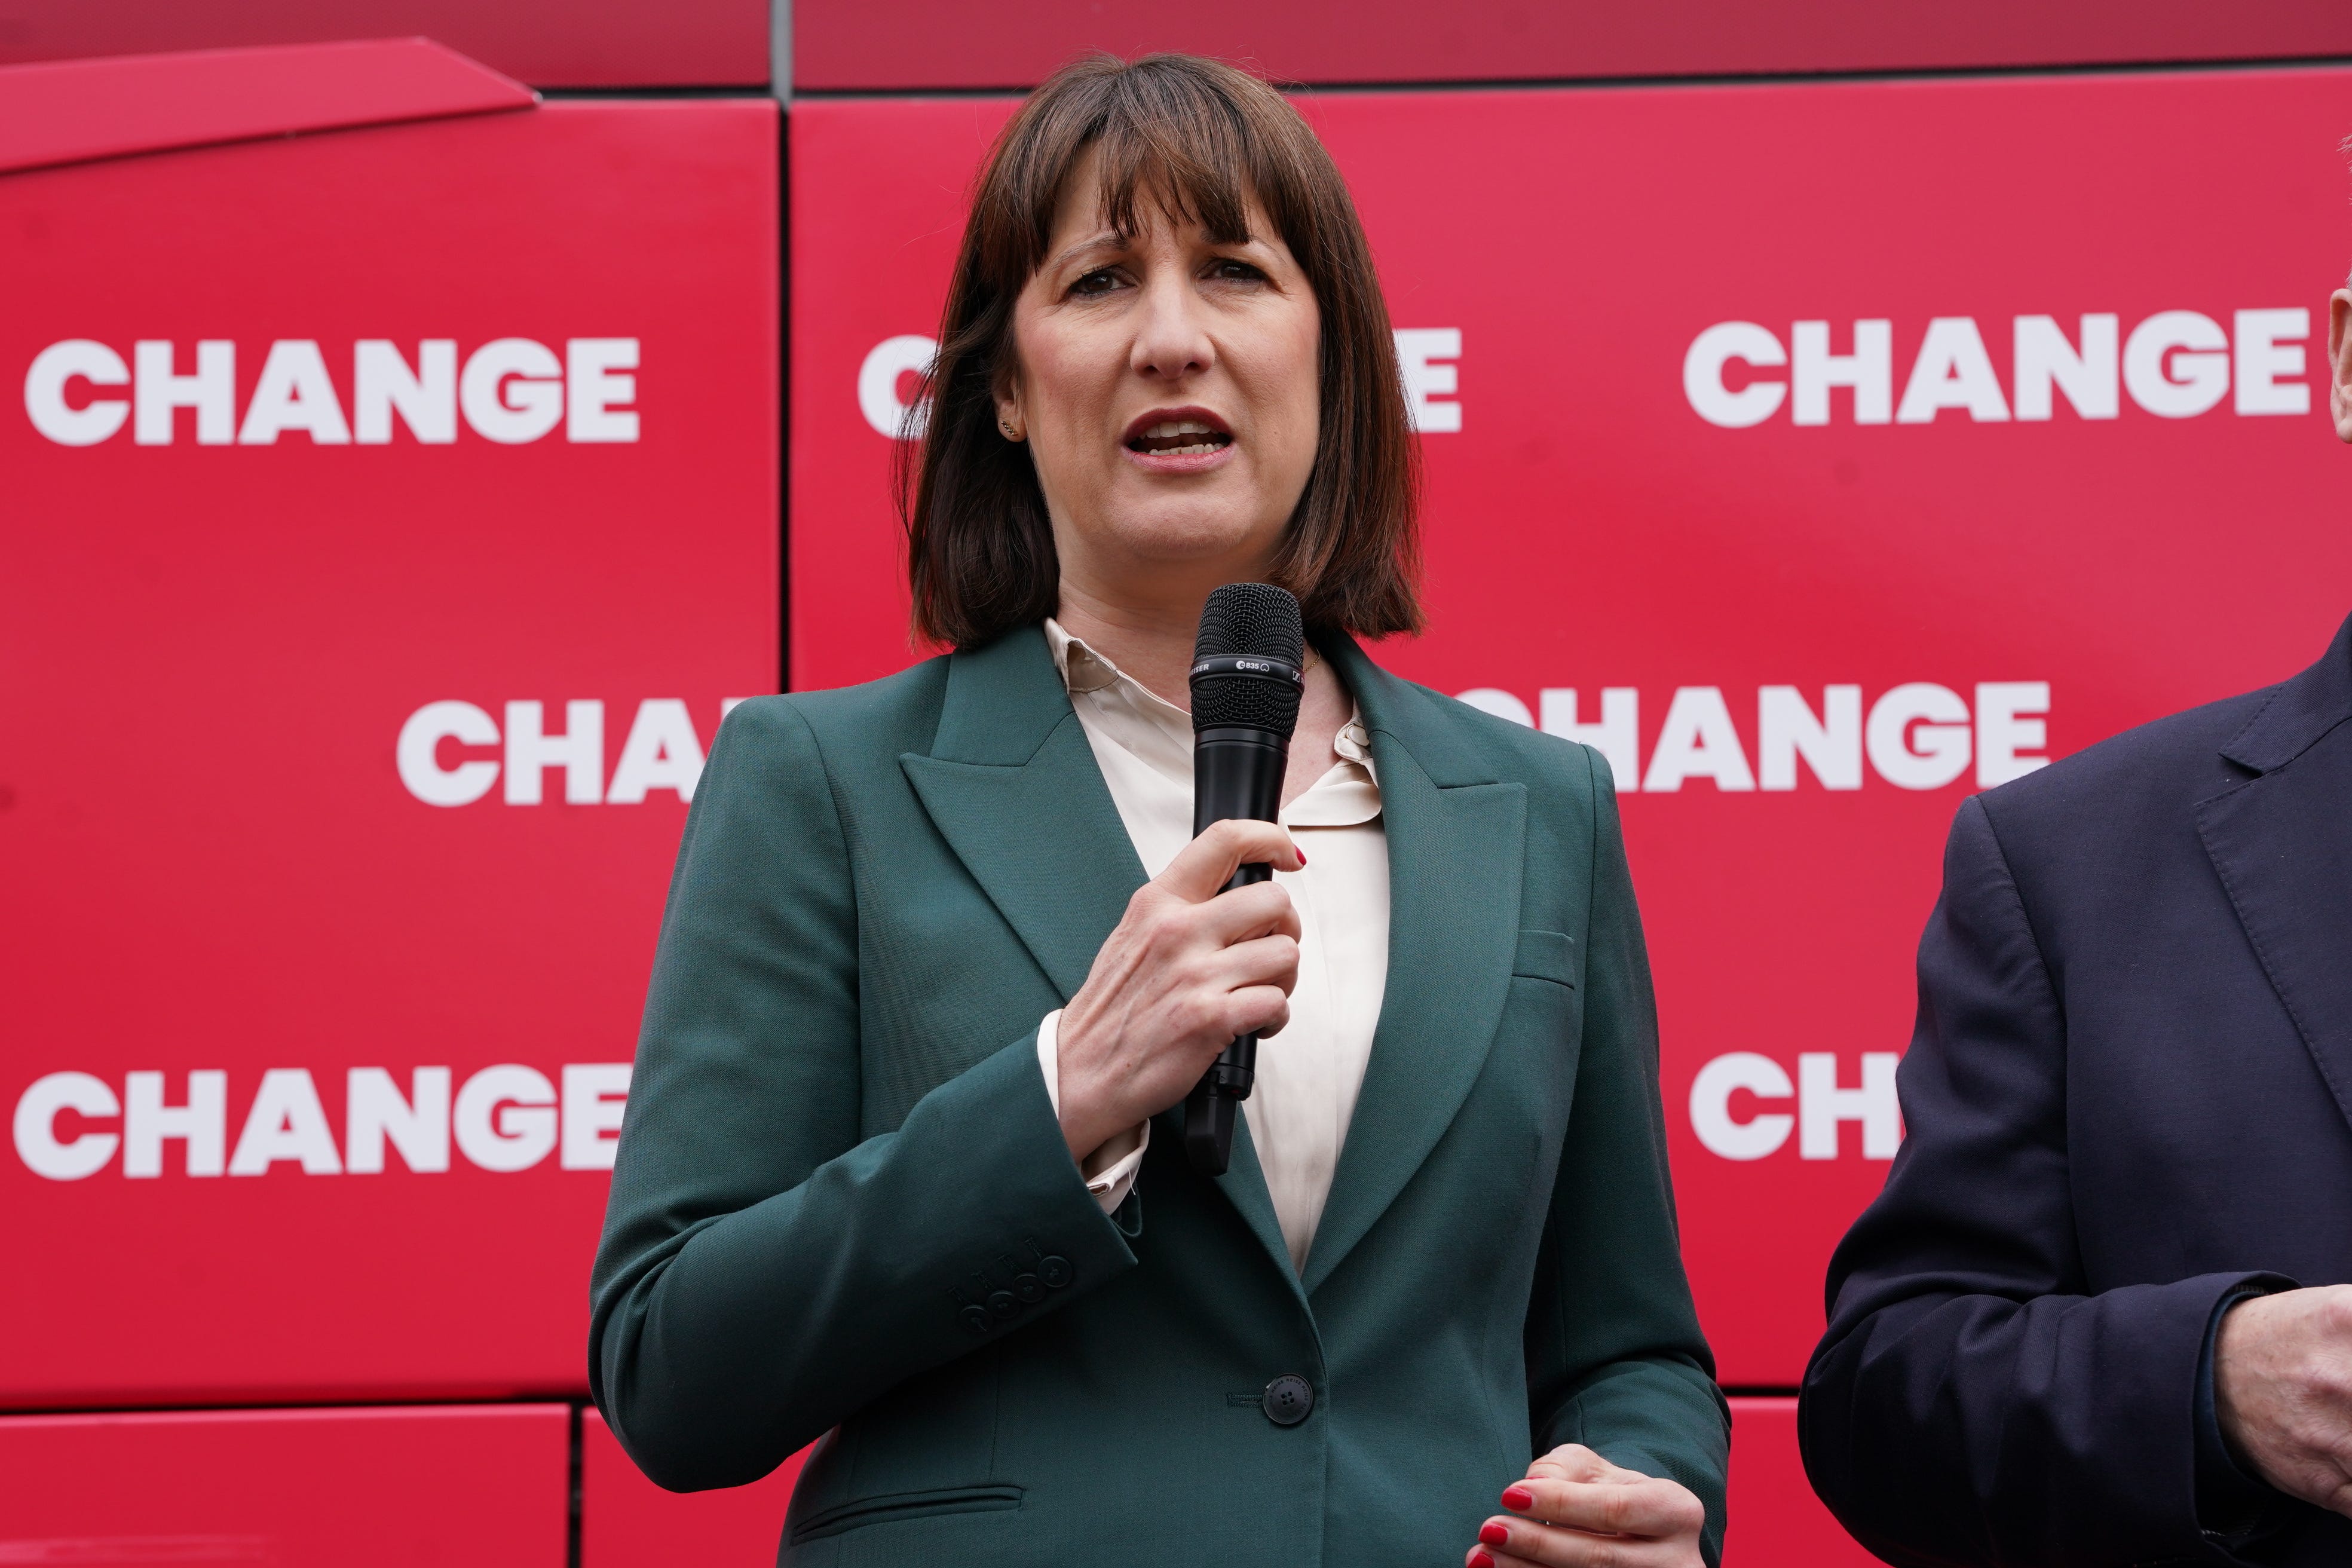 Labour shadow chancellor Rachel Reeves (Lucy North/PA)